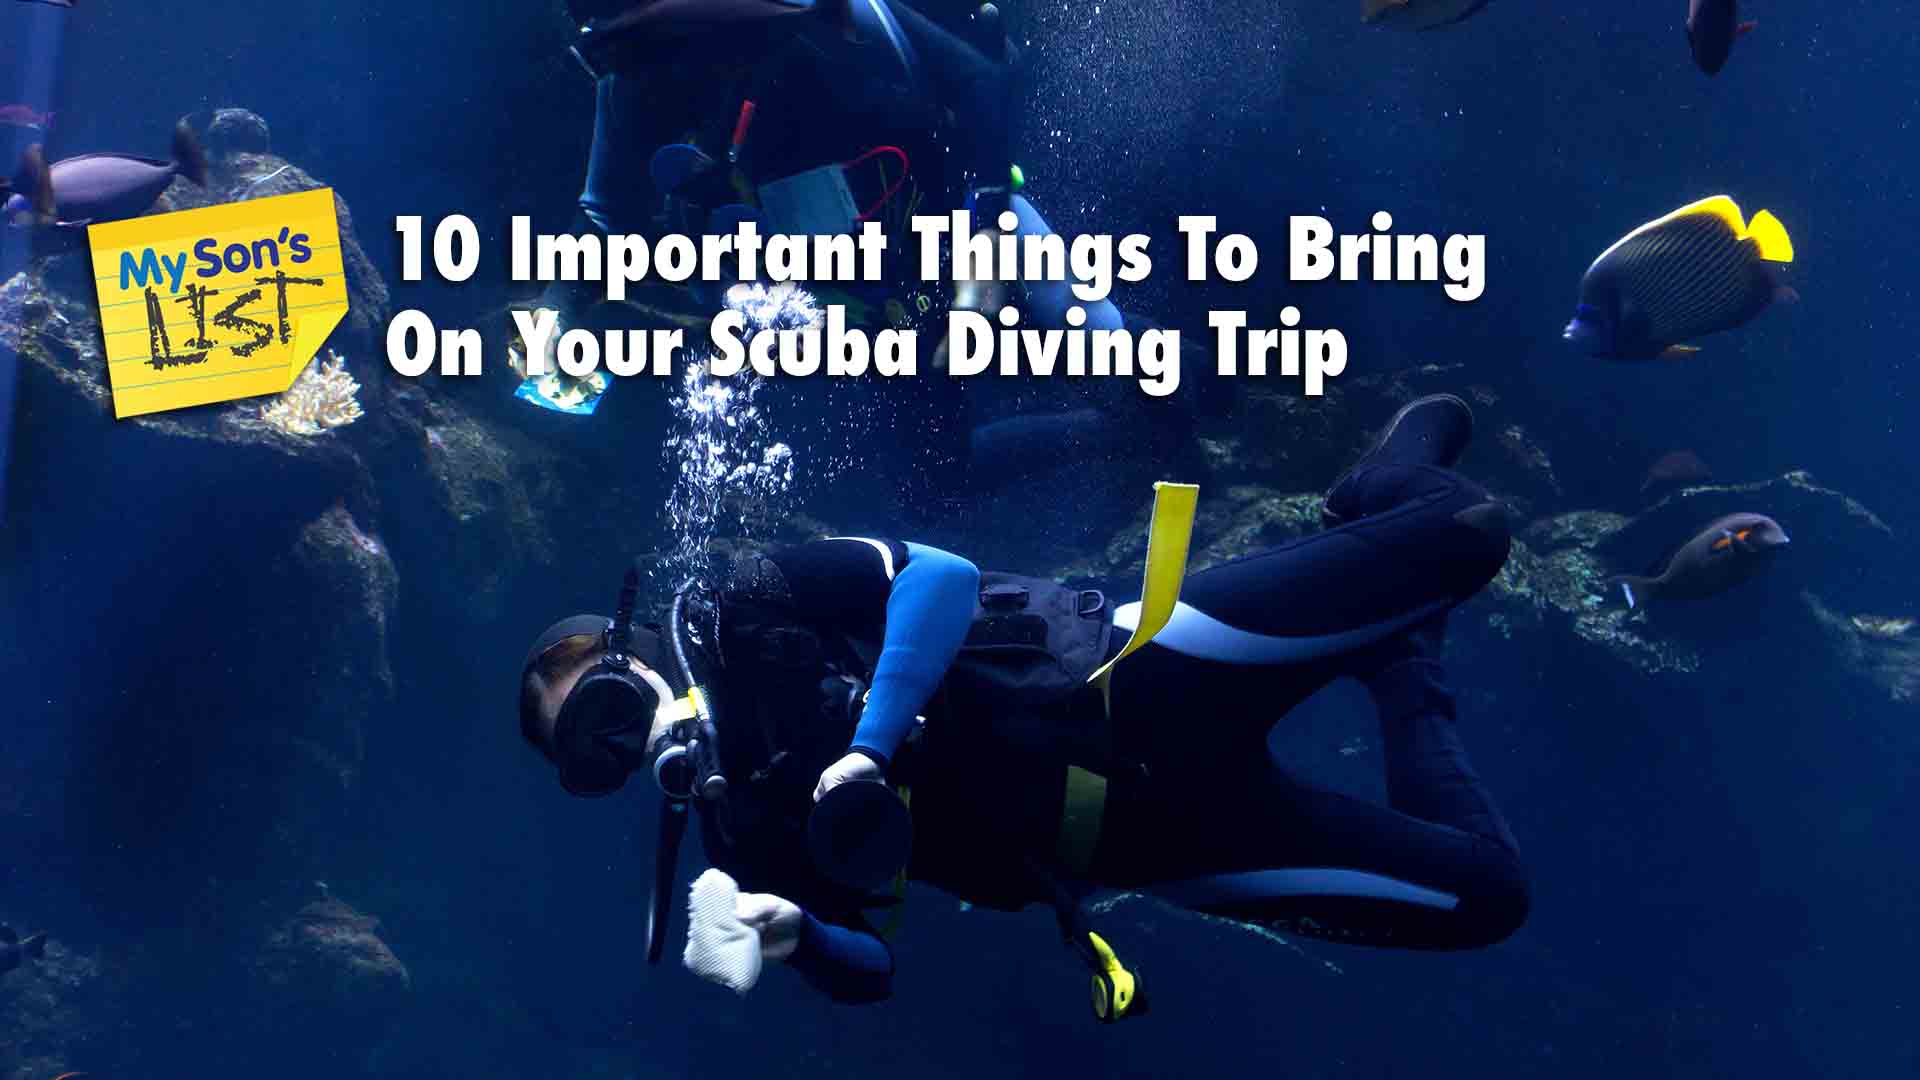 My Sons List of the 10 important things to bring on a scuba diving trip